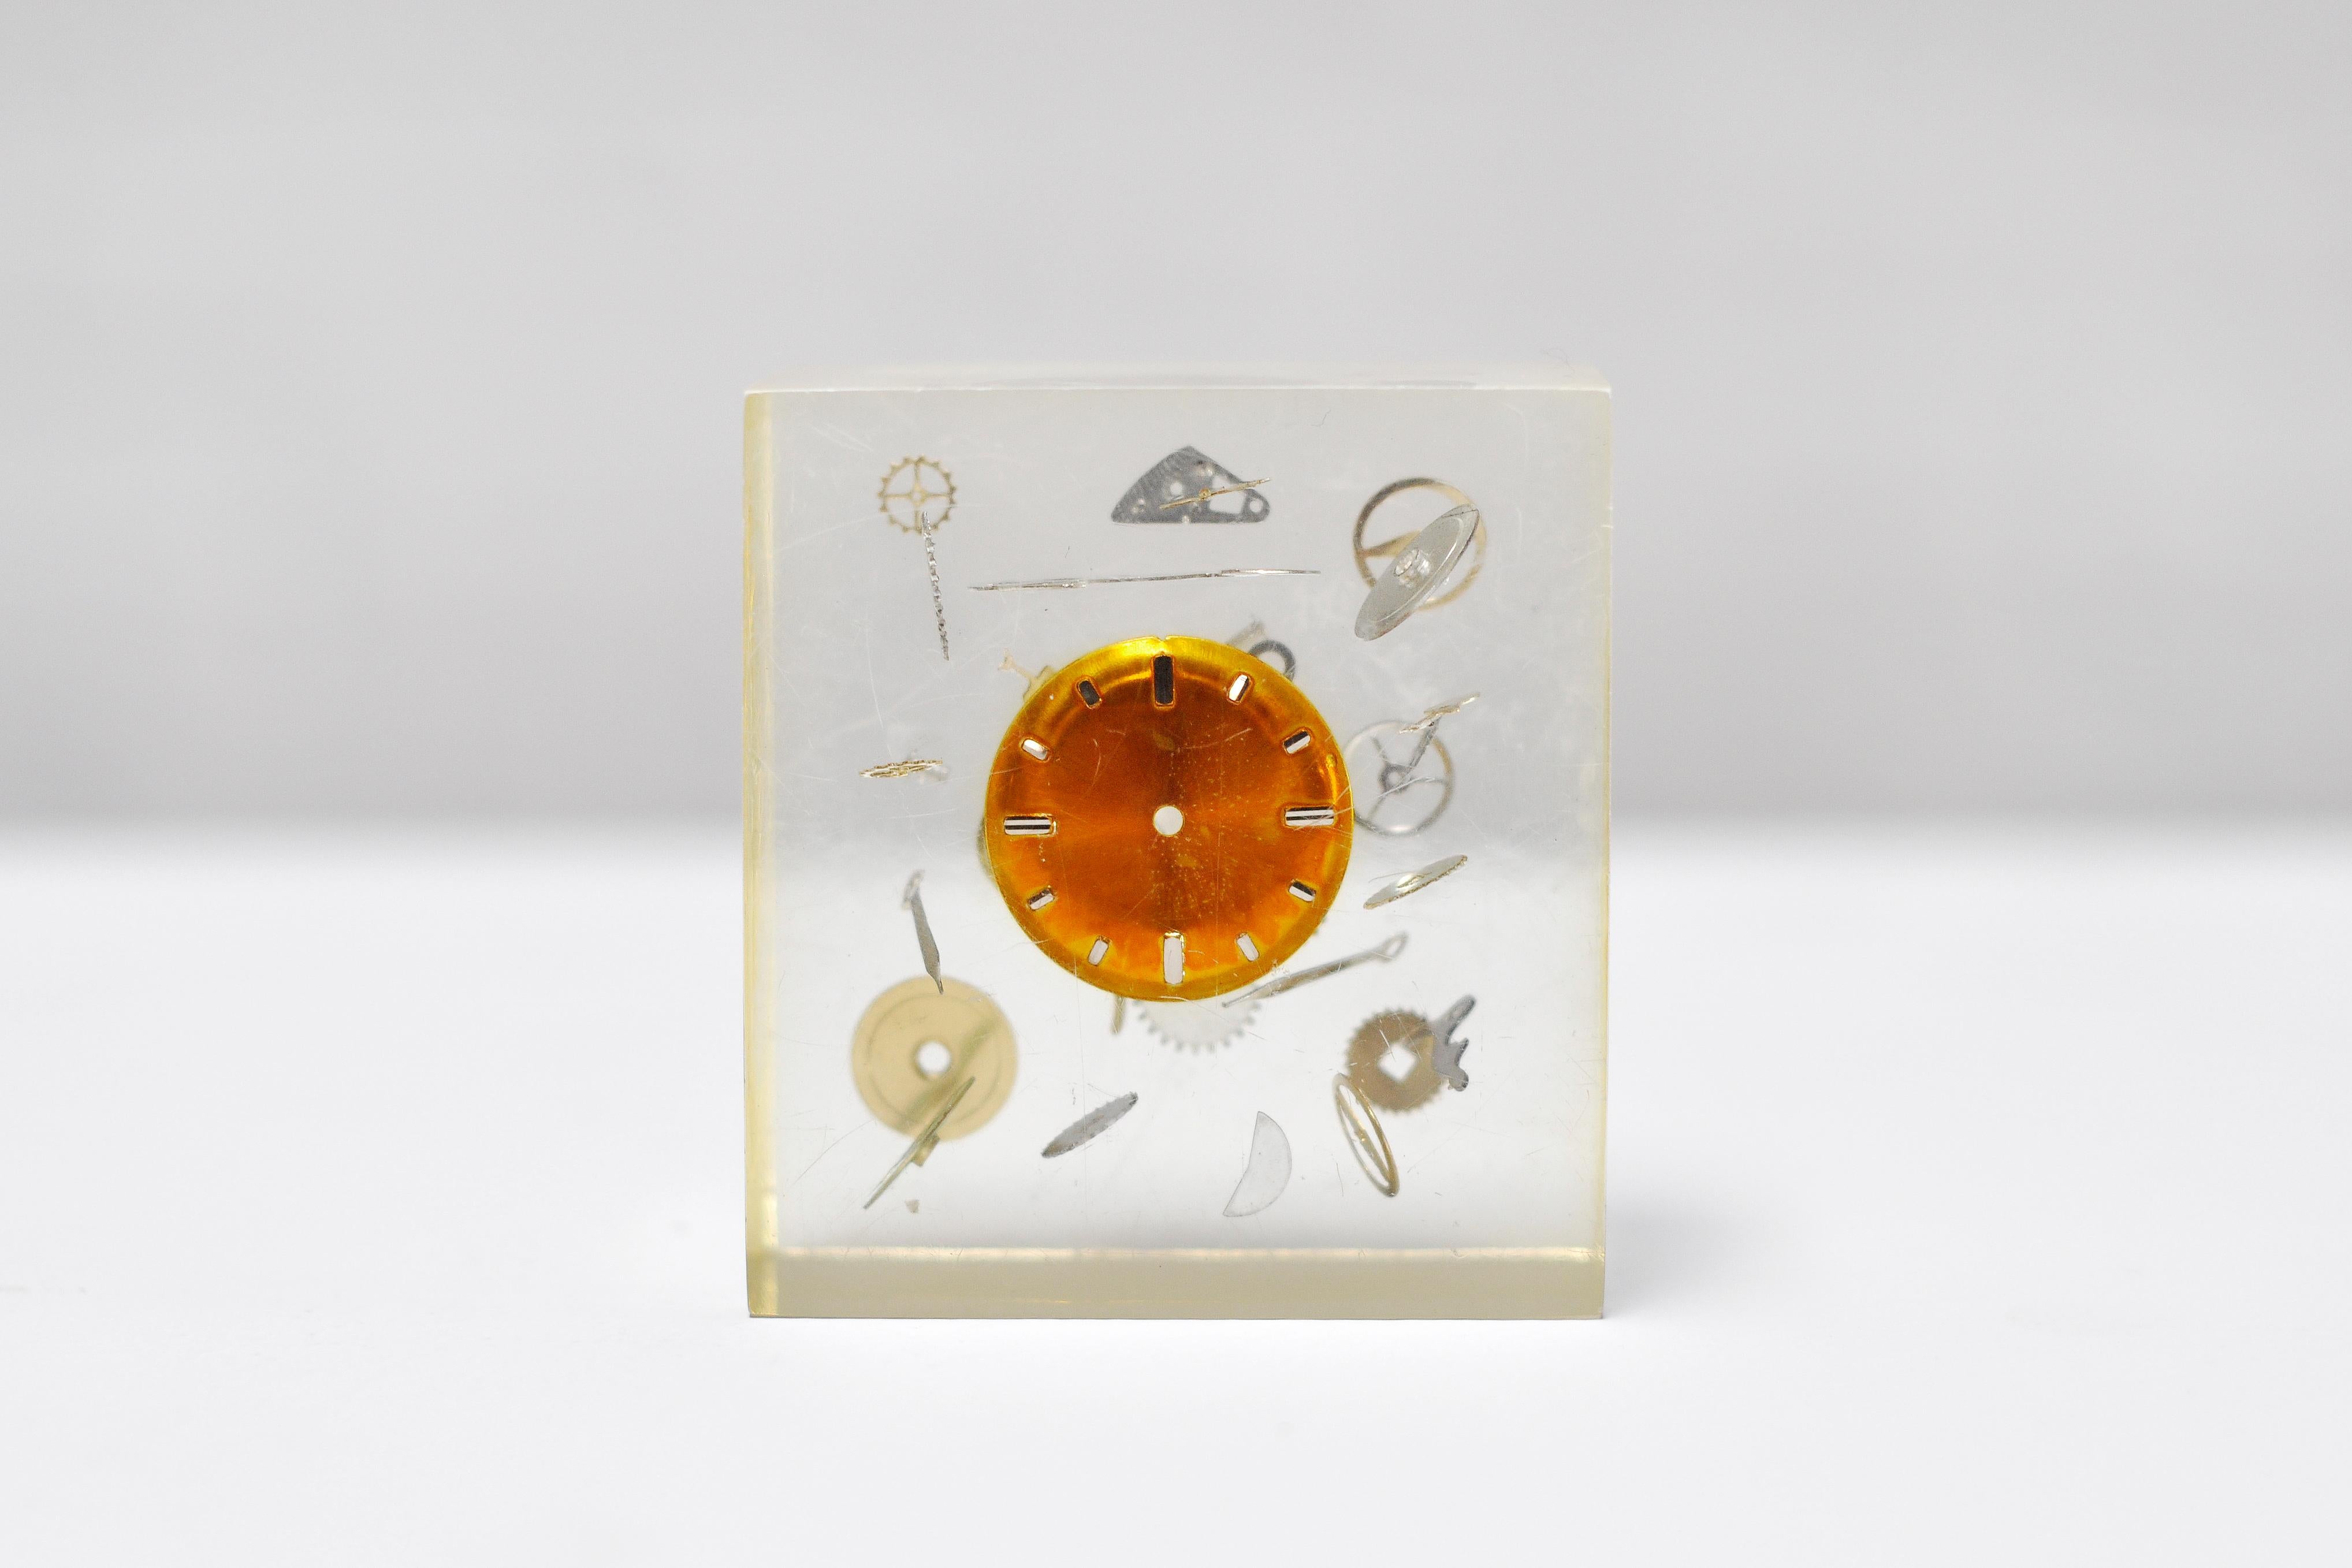 Modernist Lucite Resin Sculpture with Exploded Clock by Pierre Giraudon, 1970's For Sale 1